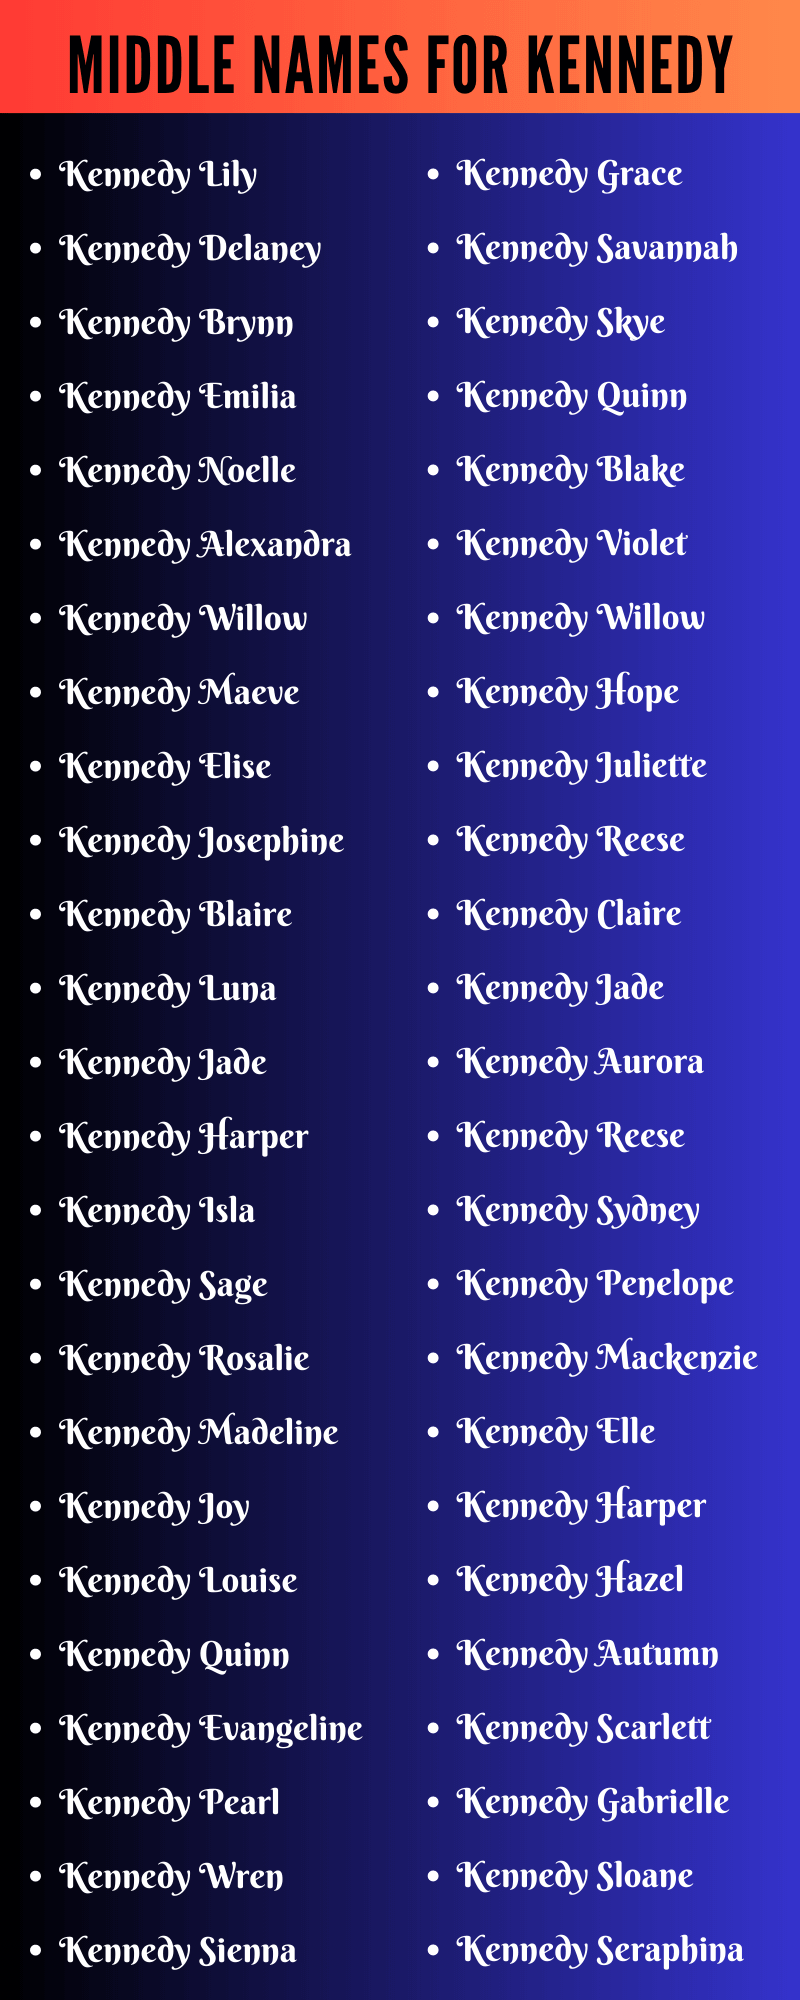 Middle Names For Kennedy